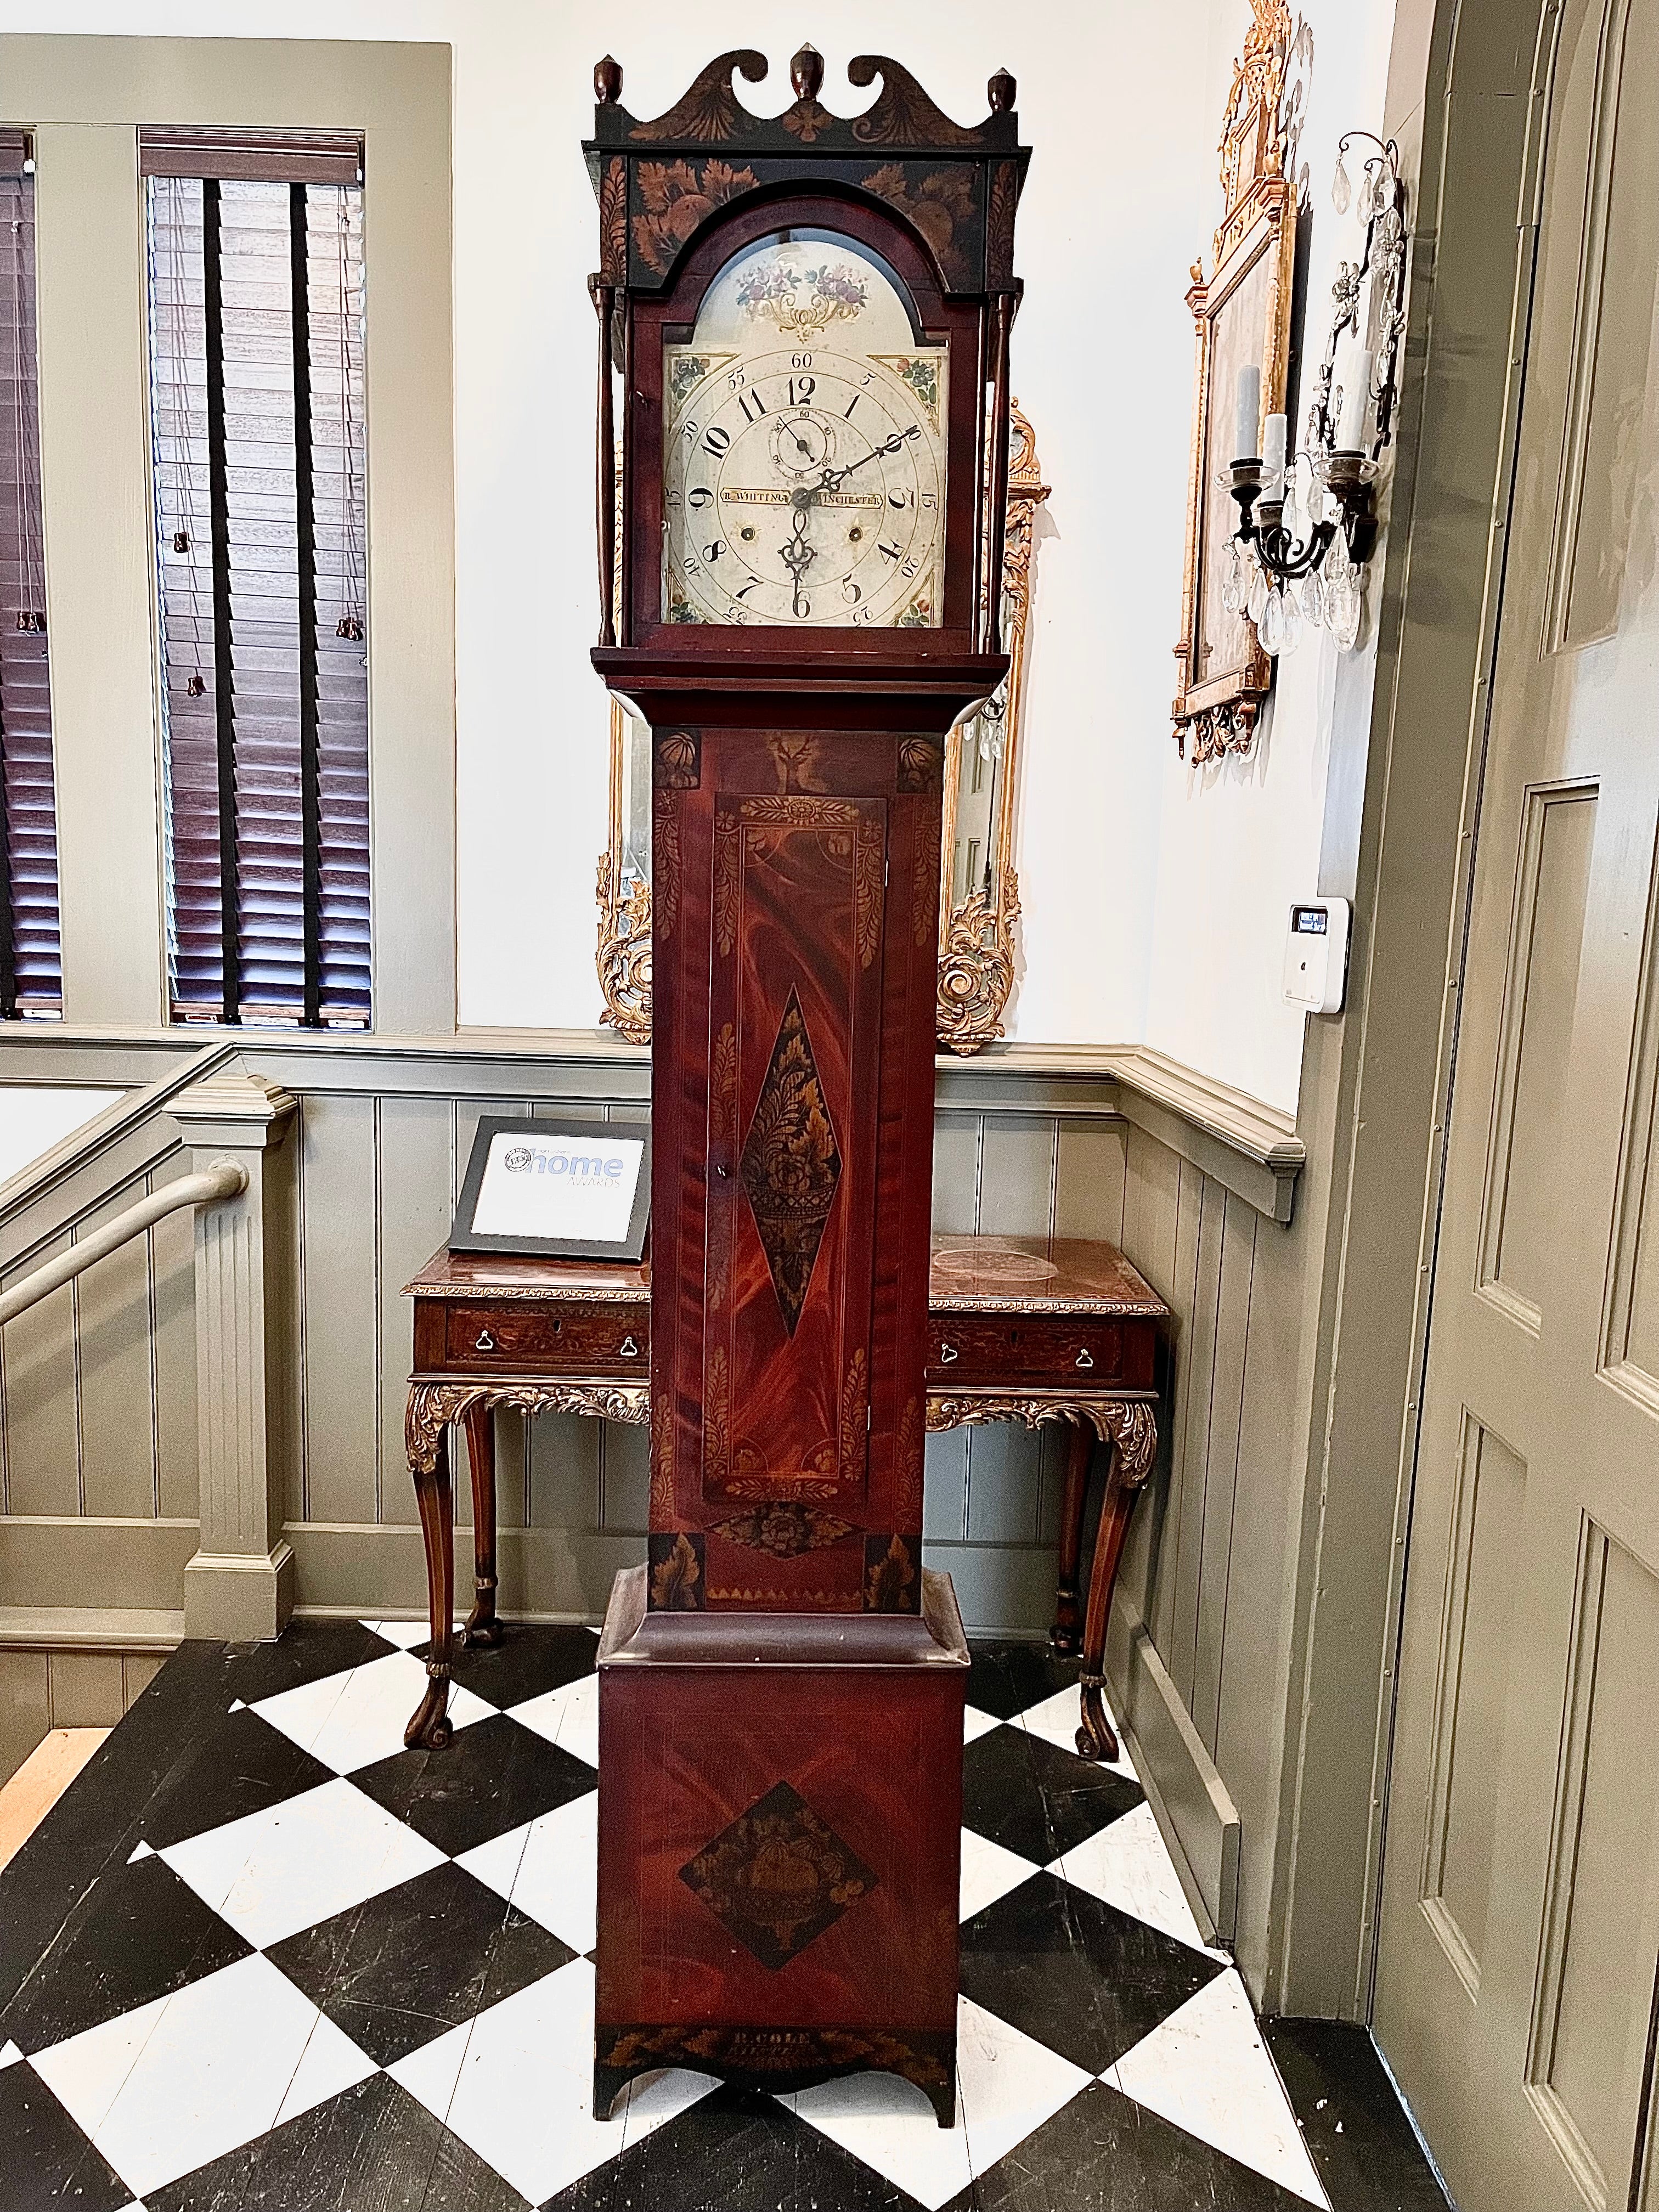 A Rare and Complete American Federal Tall Case Clock.  Riley Whiting Wooden Works, original.  A Rufus Cole Grain-Painted and Stenciled Case.  Signed  R. Cole Painter.  Circa 1820-25

Rufus Cole worked in partnership with his father, Abraham, in the